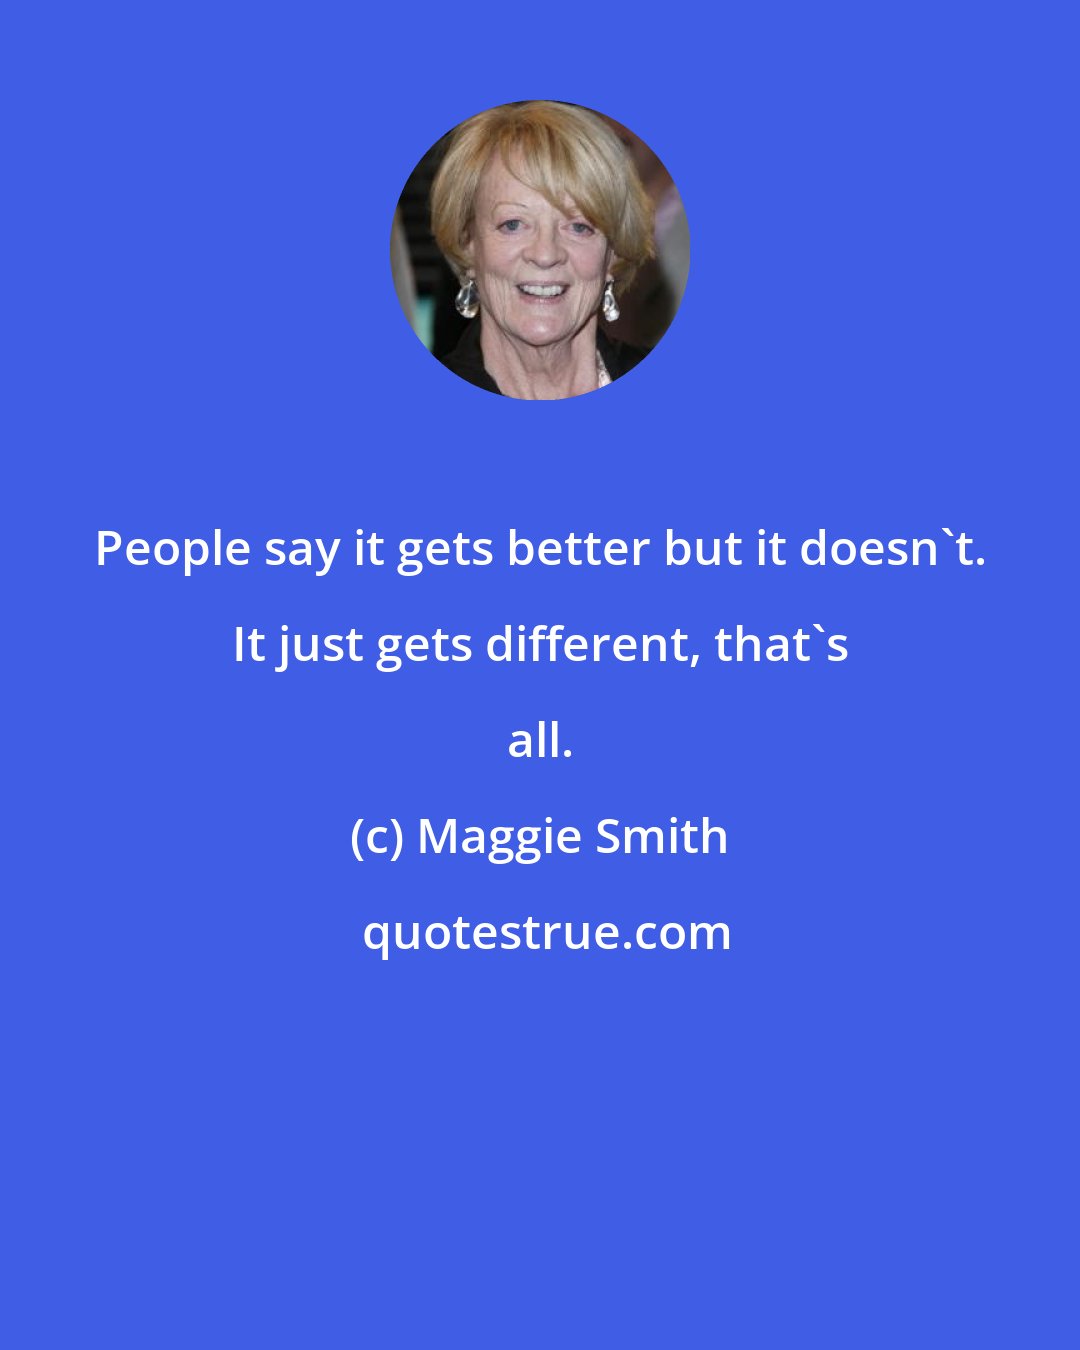 Maggie Smith: People say it gets better but it doesn't. It just gets different, that's all.